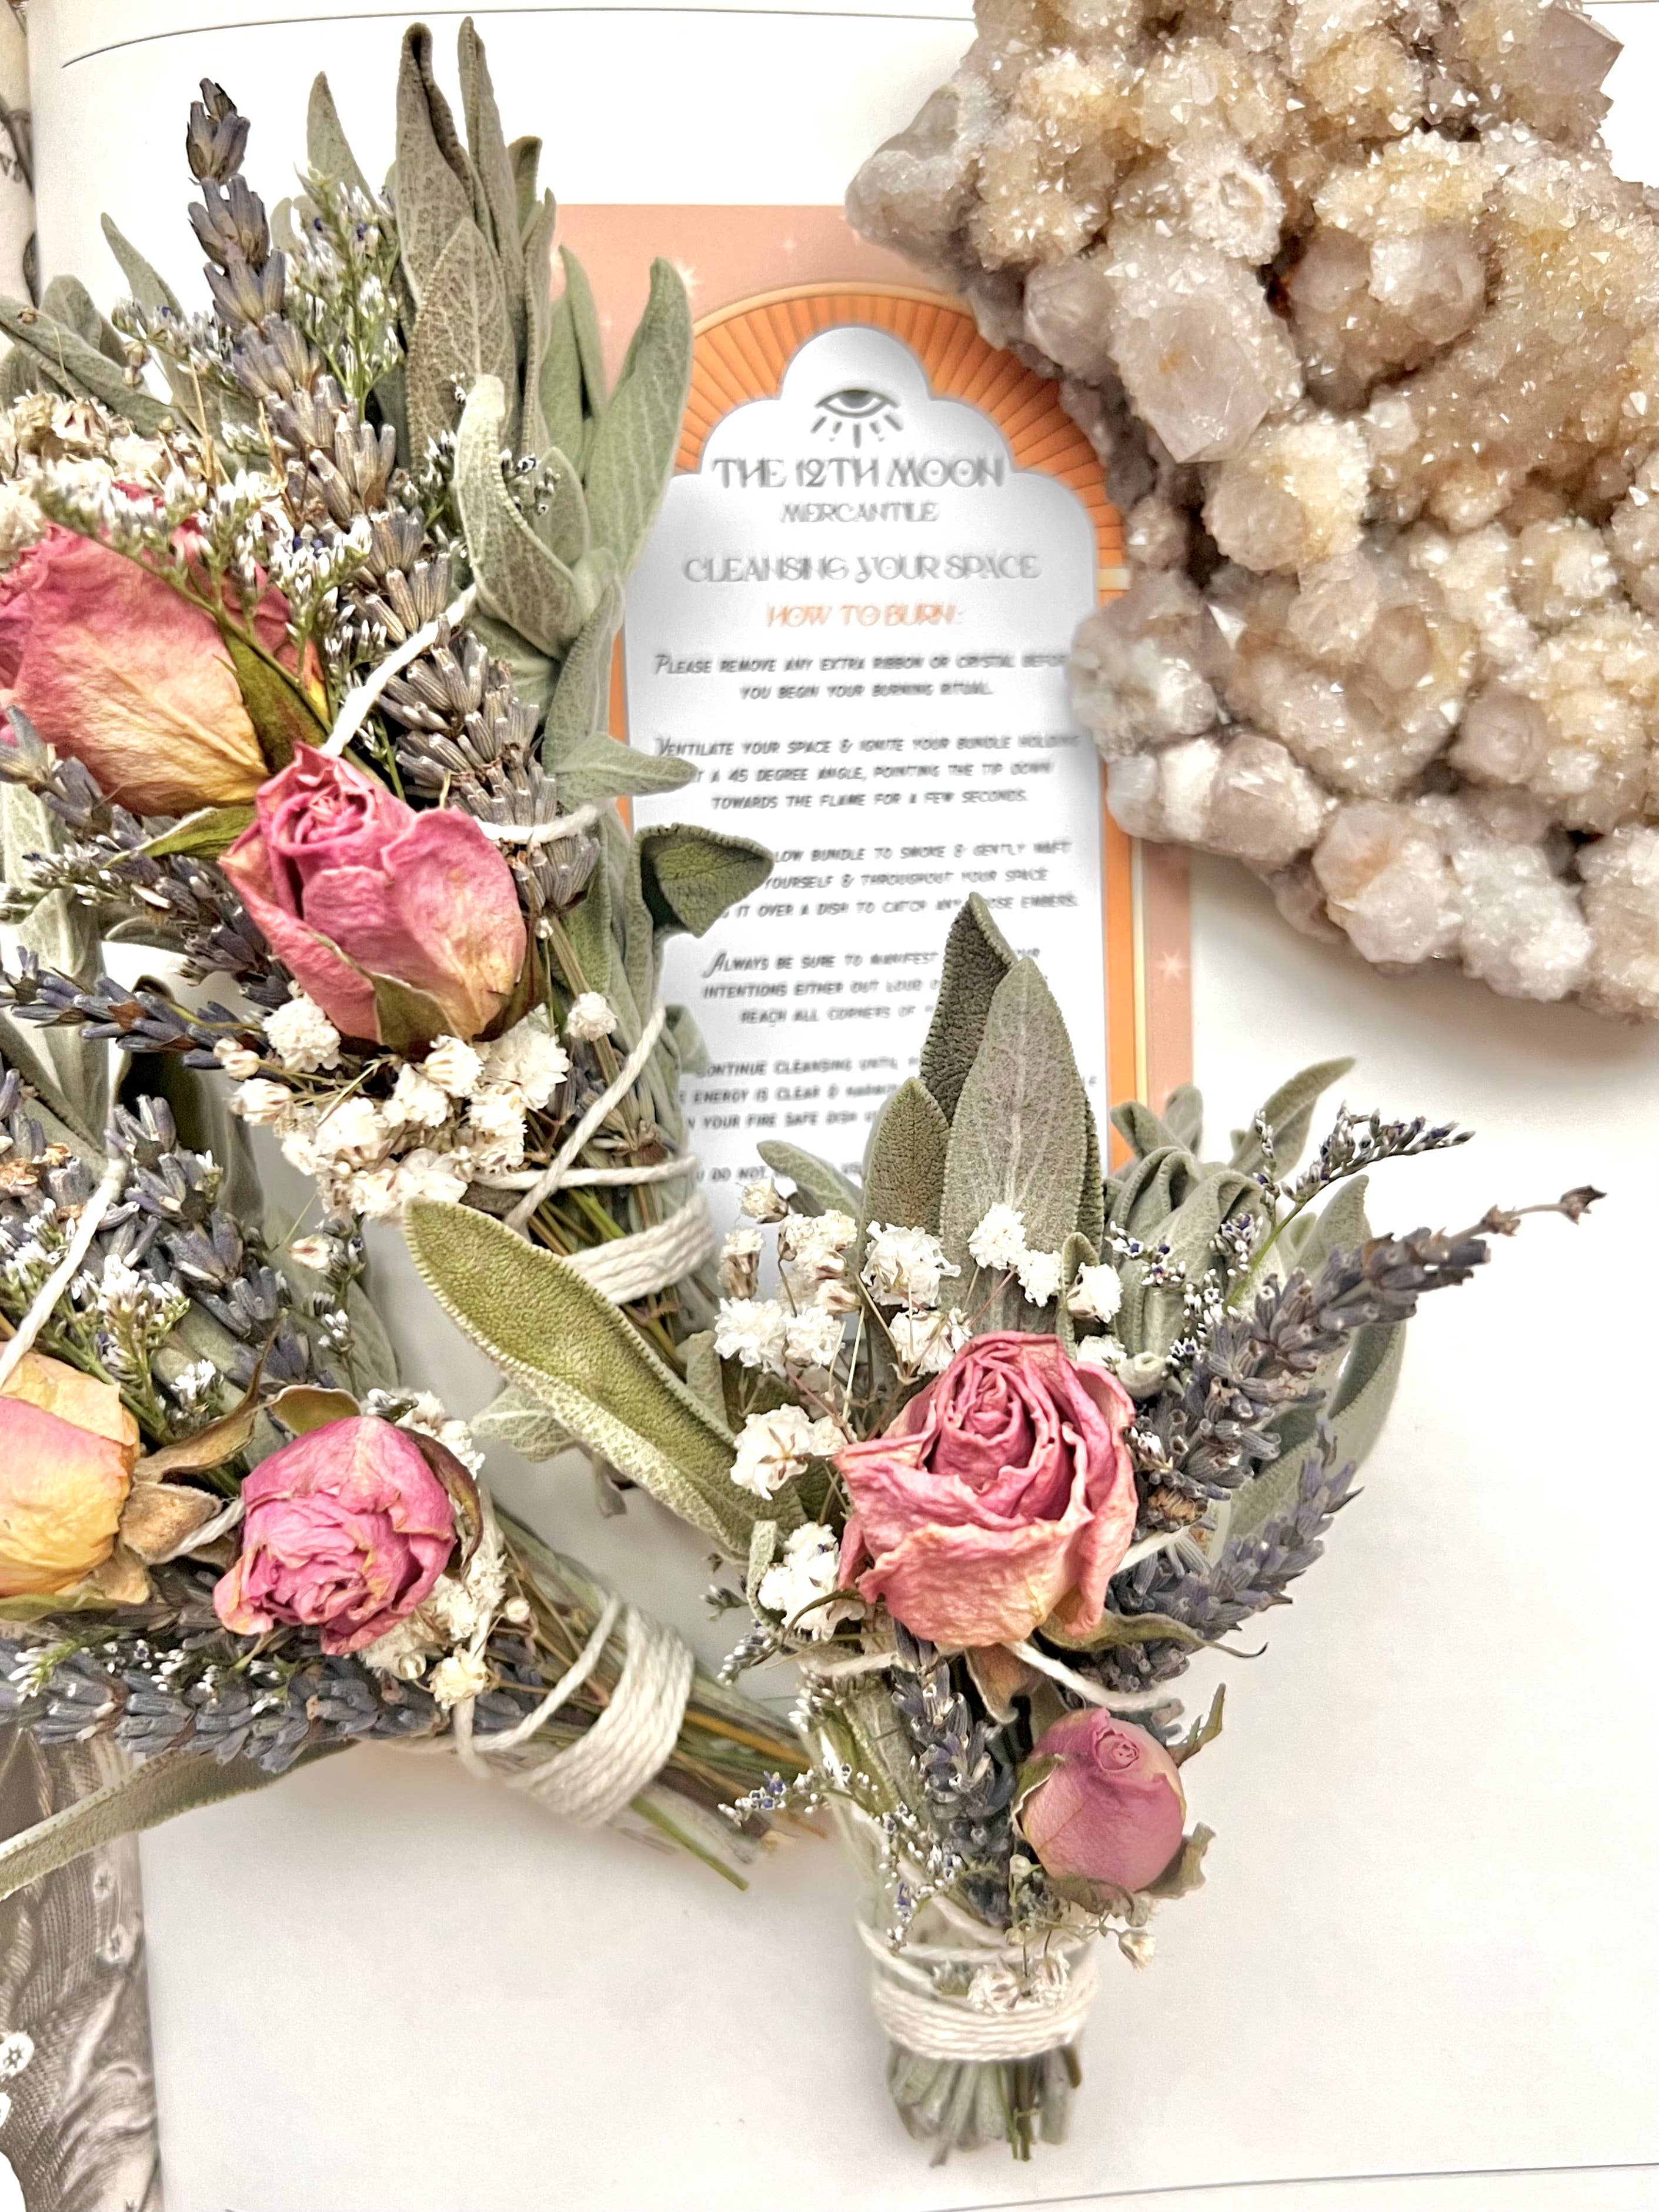 Two small floral bouquets with dried roses and lavender next to a MAGIC RITUALS Mini Sage Smudge Bundle - Smoke Cleanser on a pale background, infused with essential oil for aromatherapy benefits by The 12th Moon.